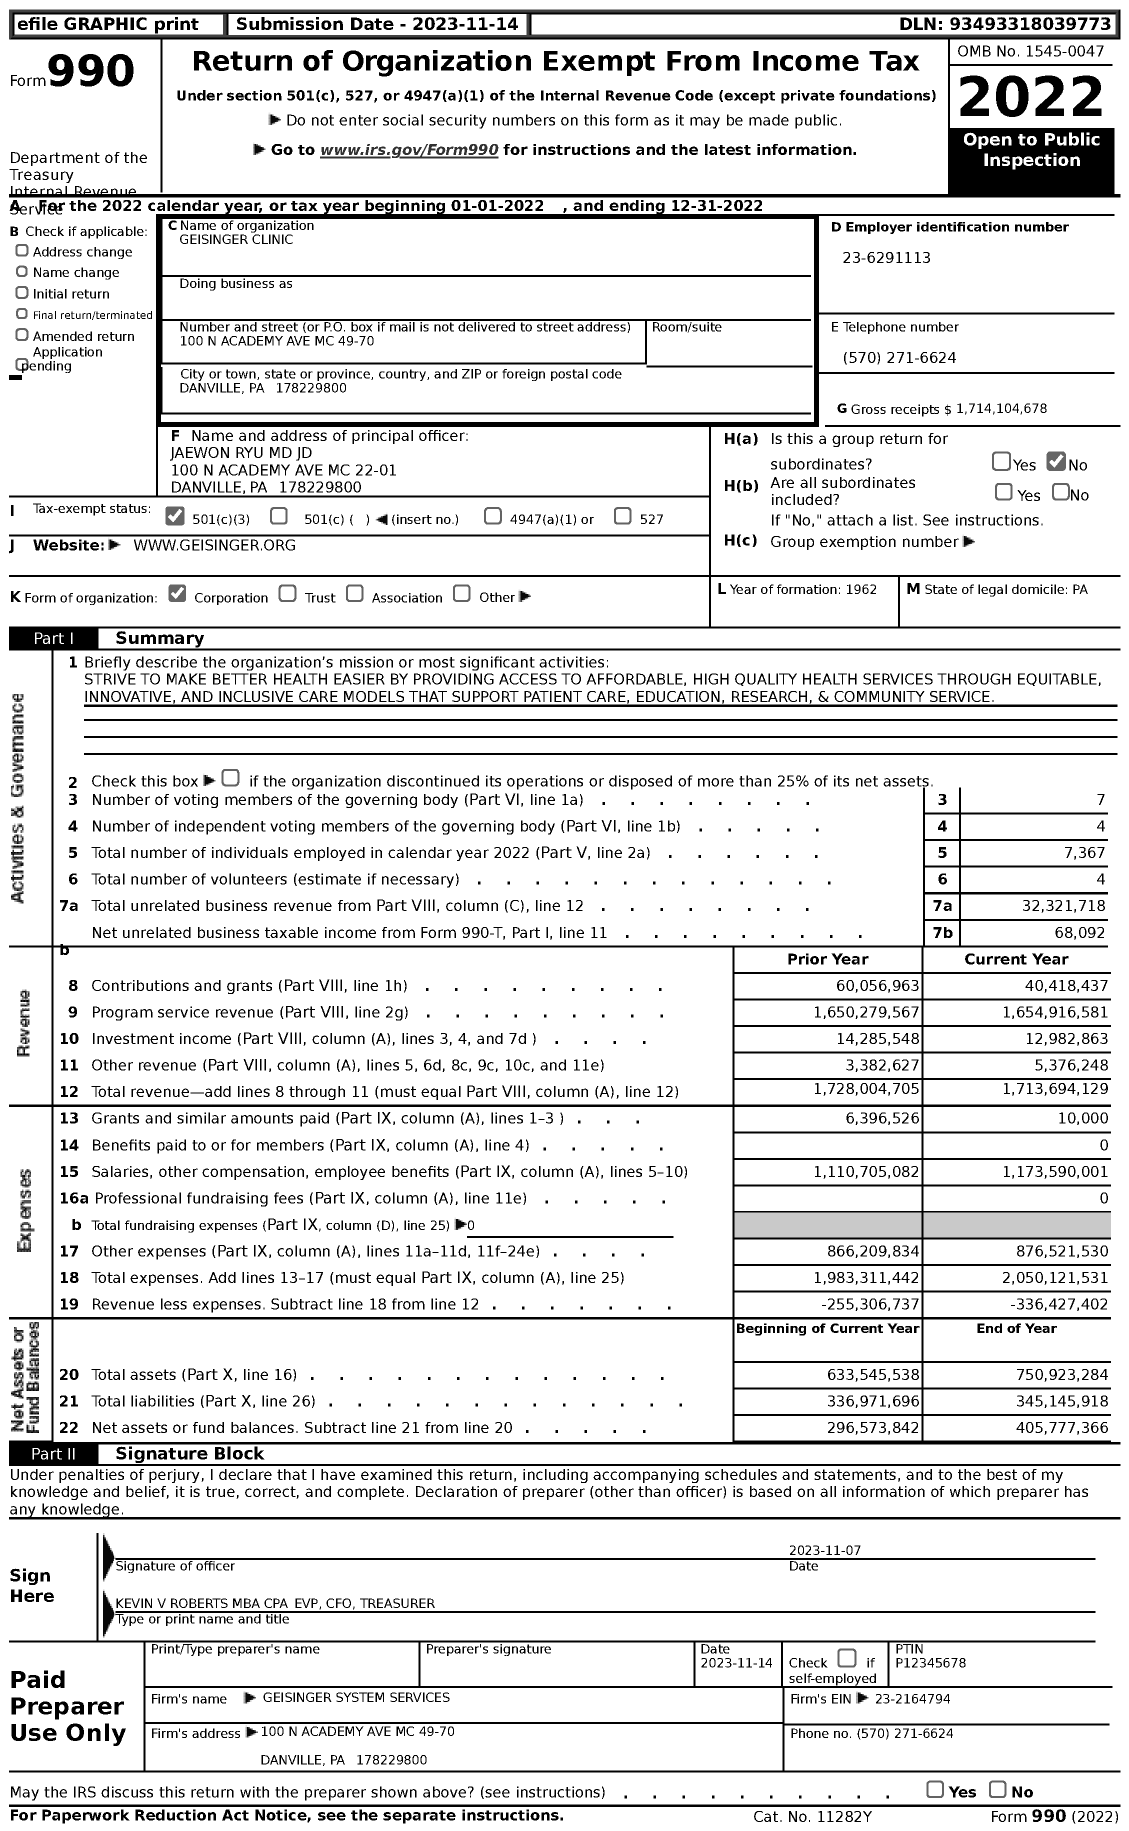 Image of first page of 2022 Form 990 for Geisinger Clinic (GHS)